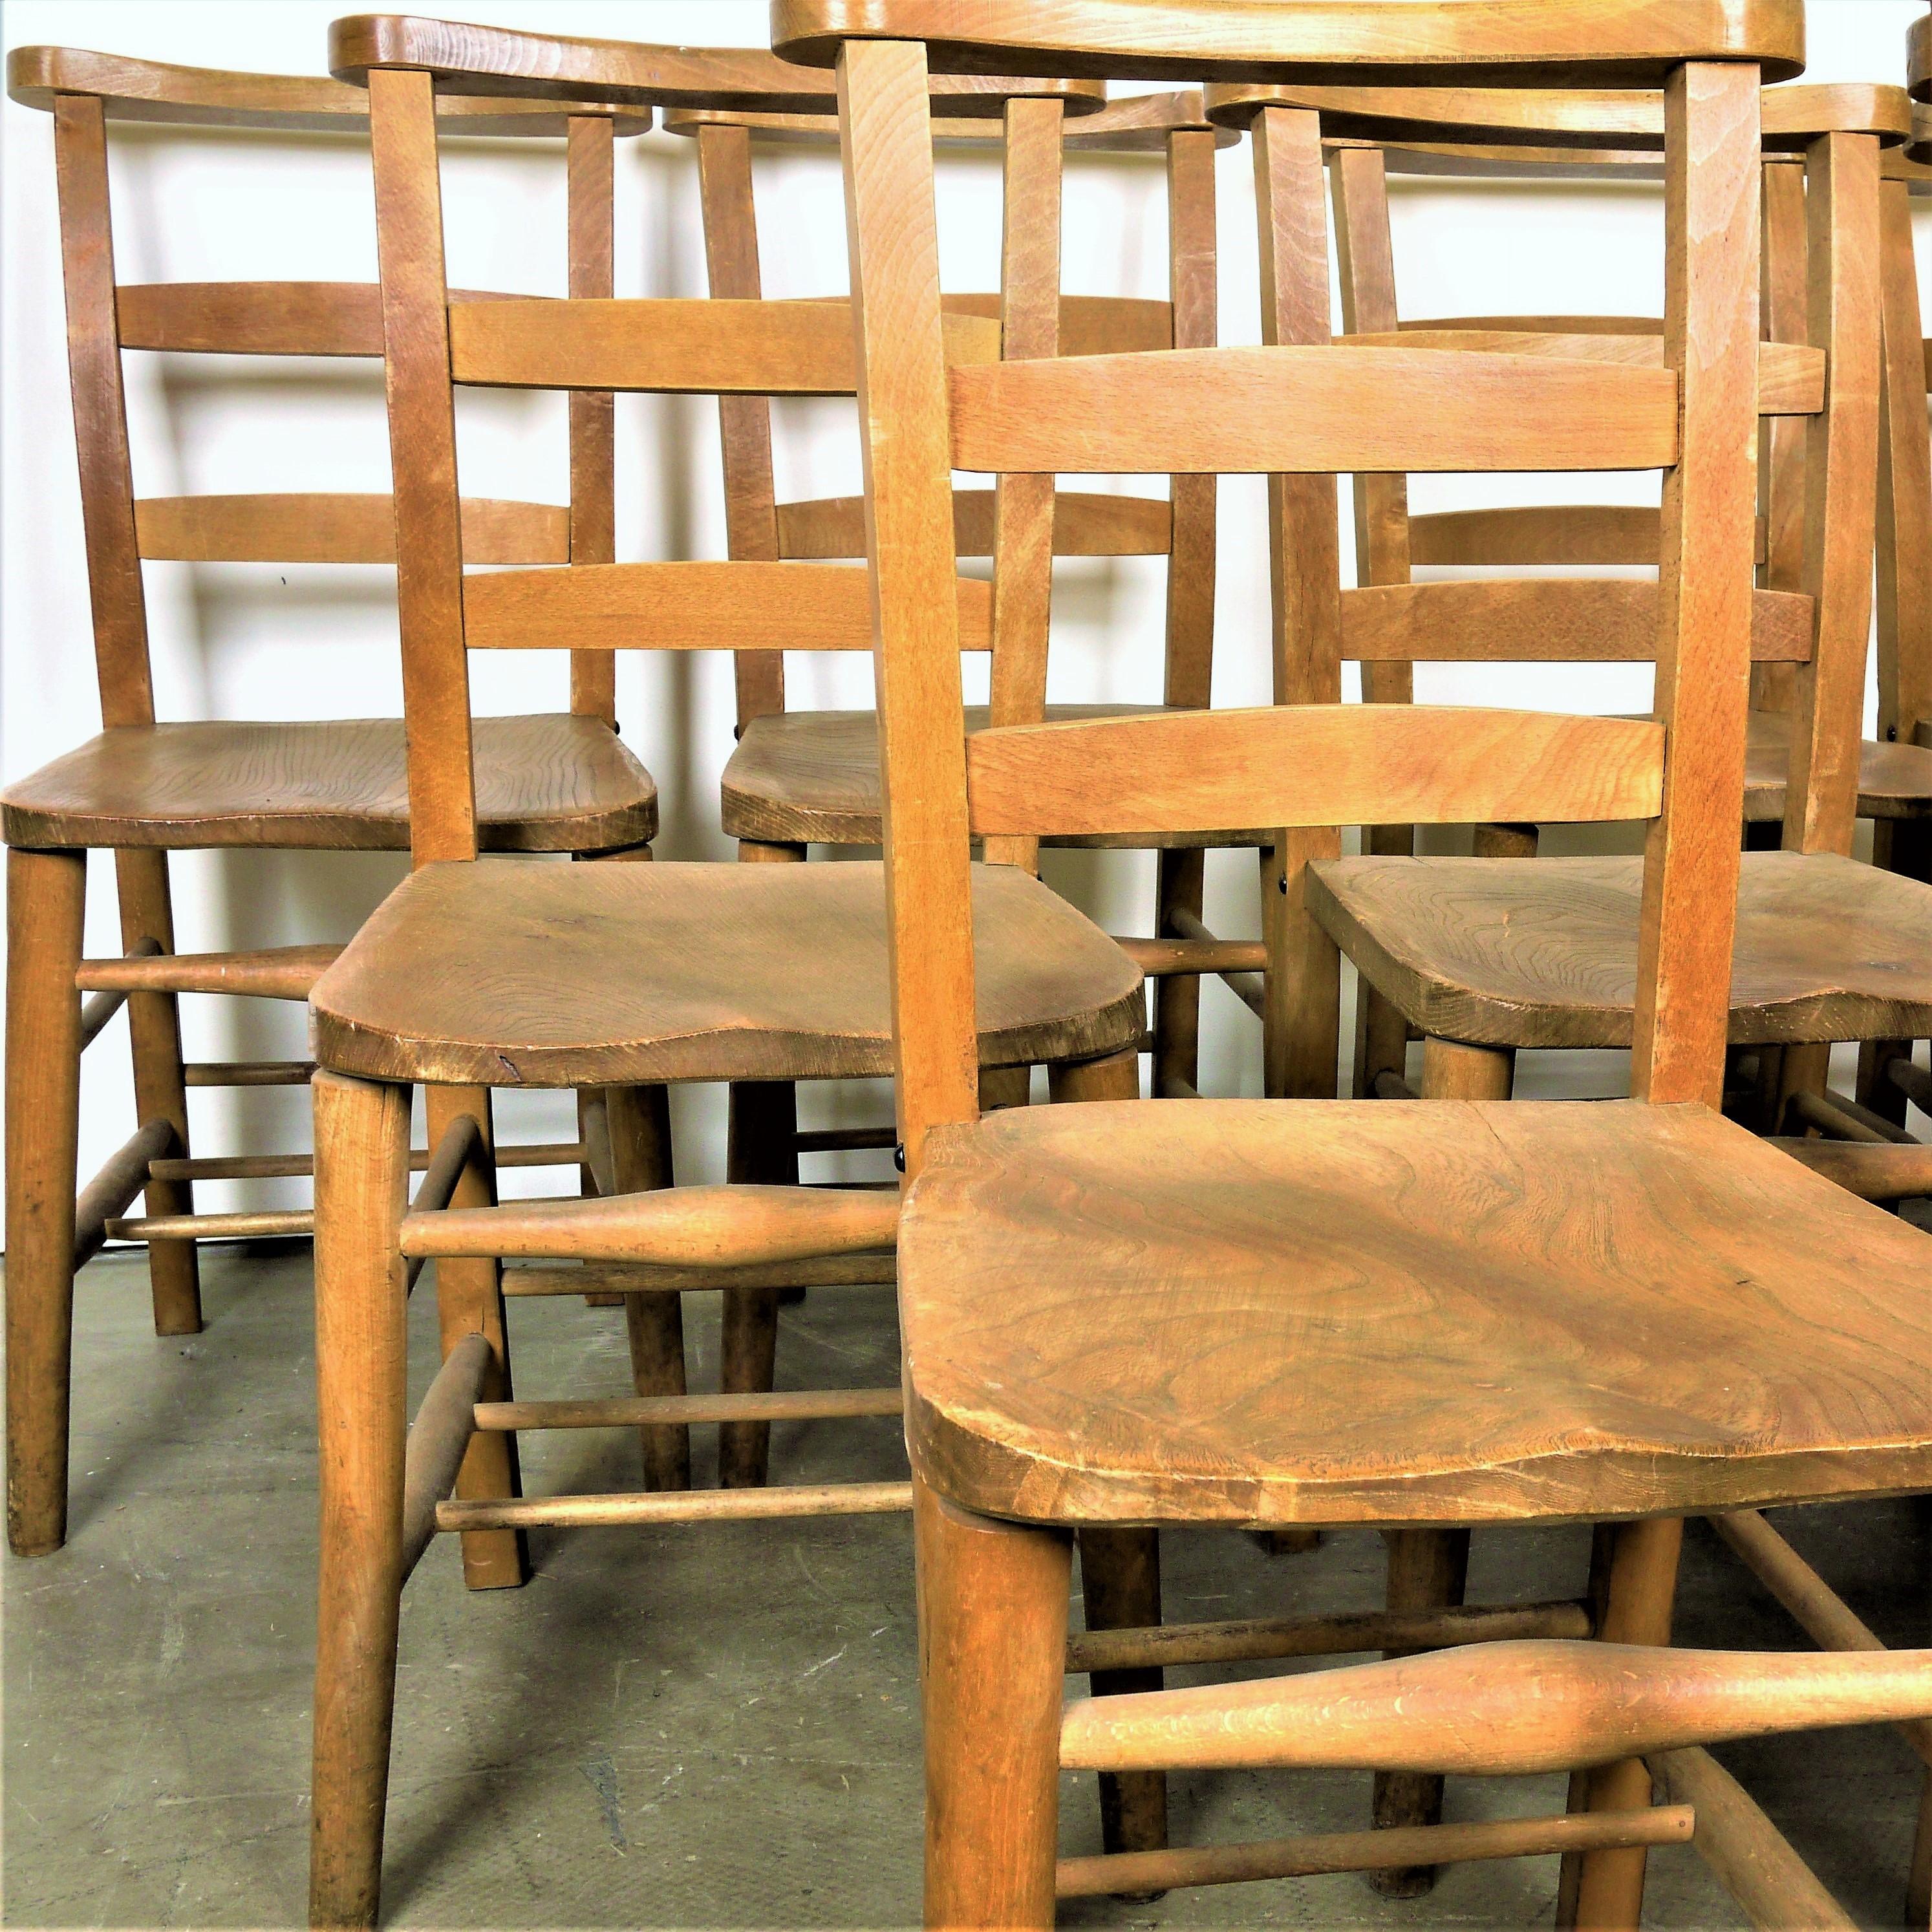 1930s elm church/chapel dining chairs - set of six - other quantities available

Set of six 1930s vintage elm church/chapel dining chairs. England has a wonderfully rich heritage for making chairs. At the height of production at the turn of the